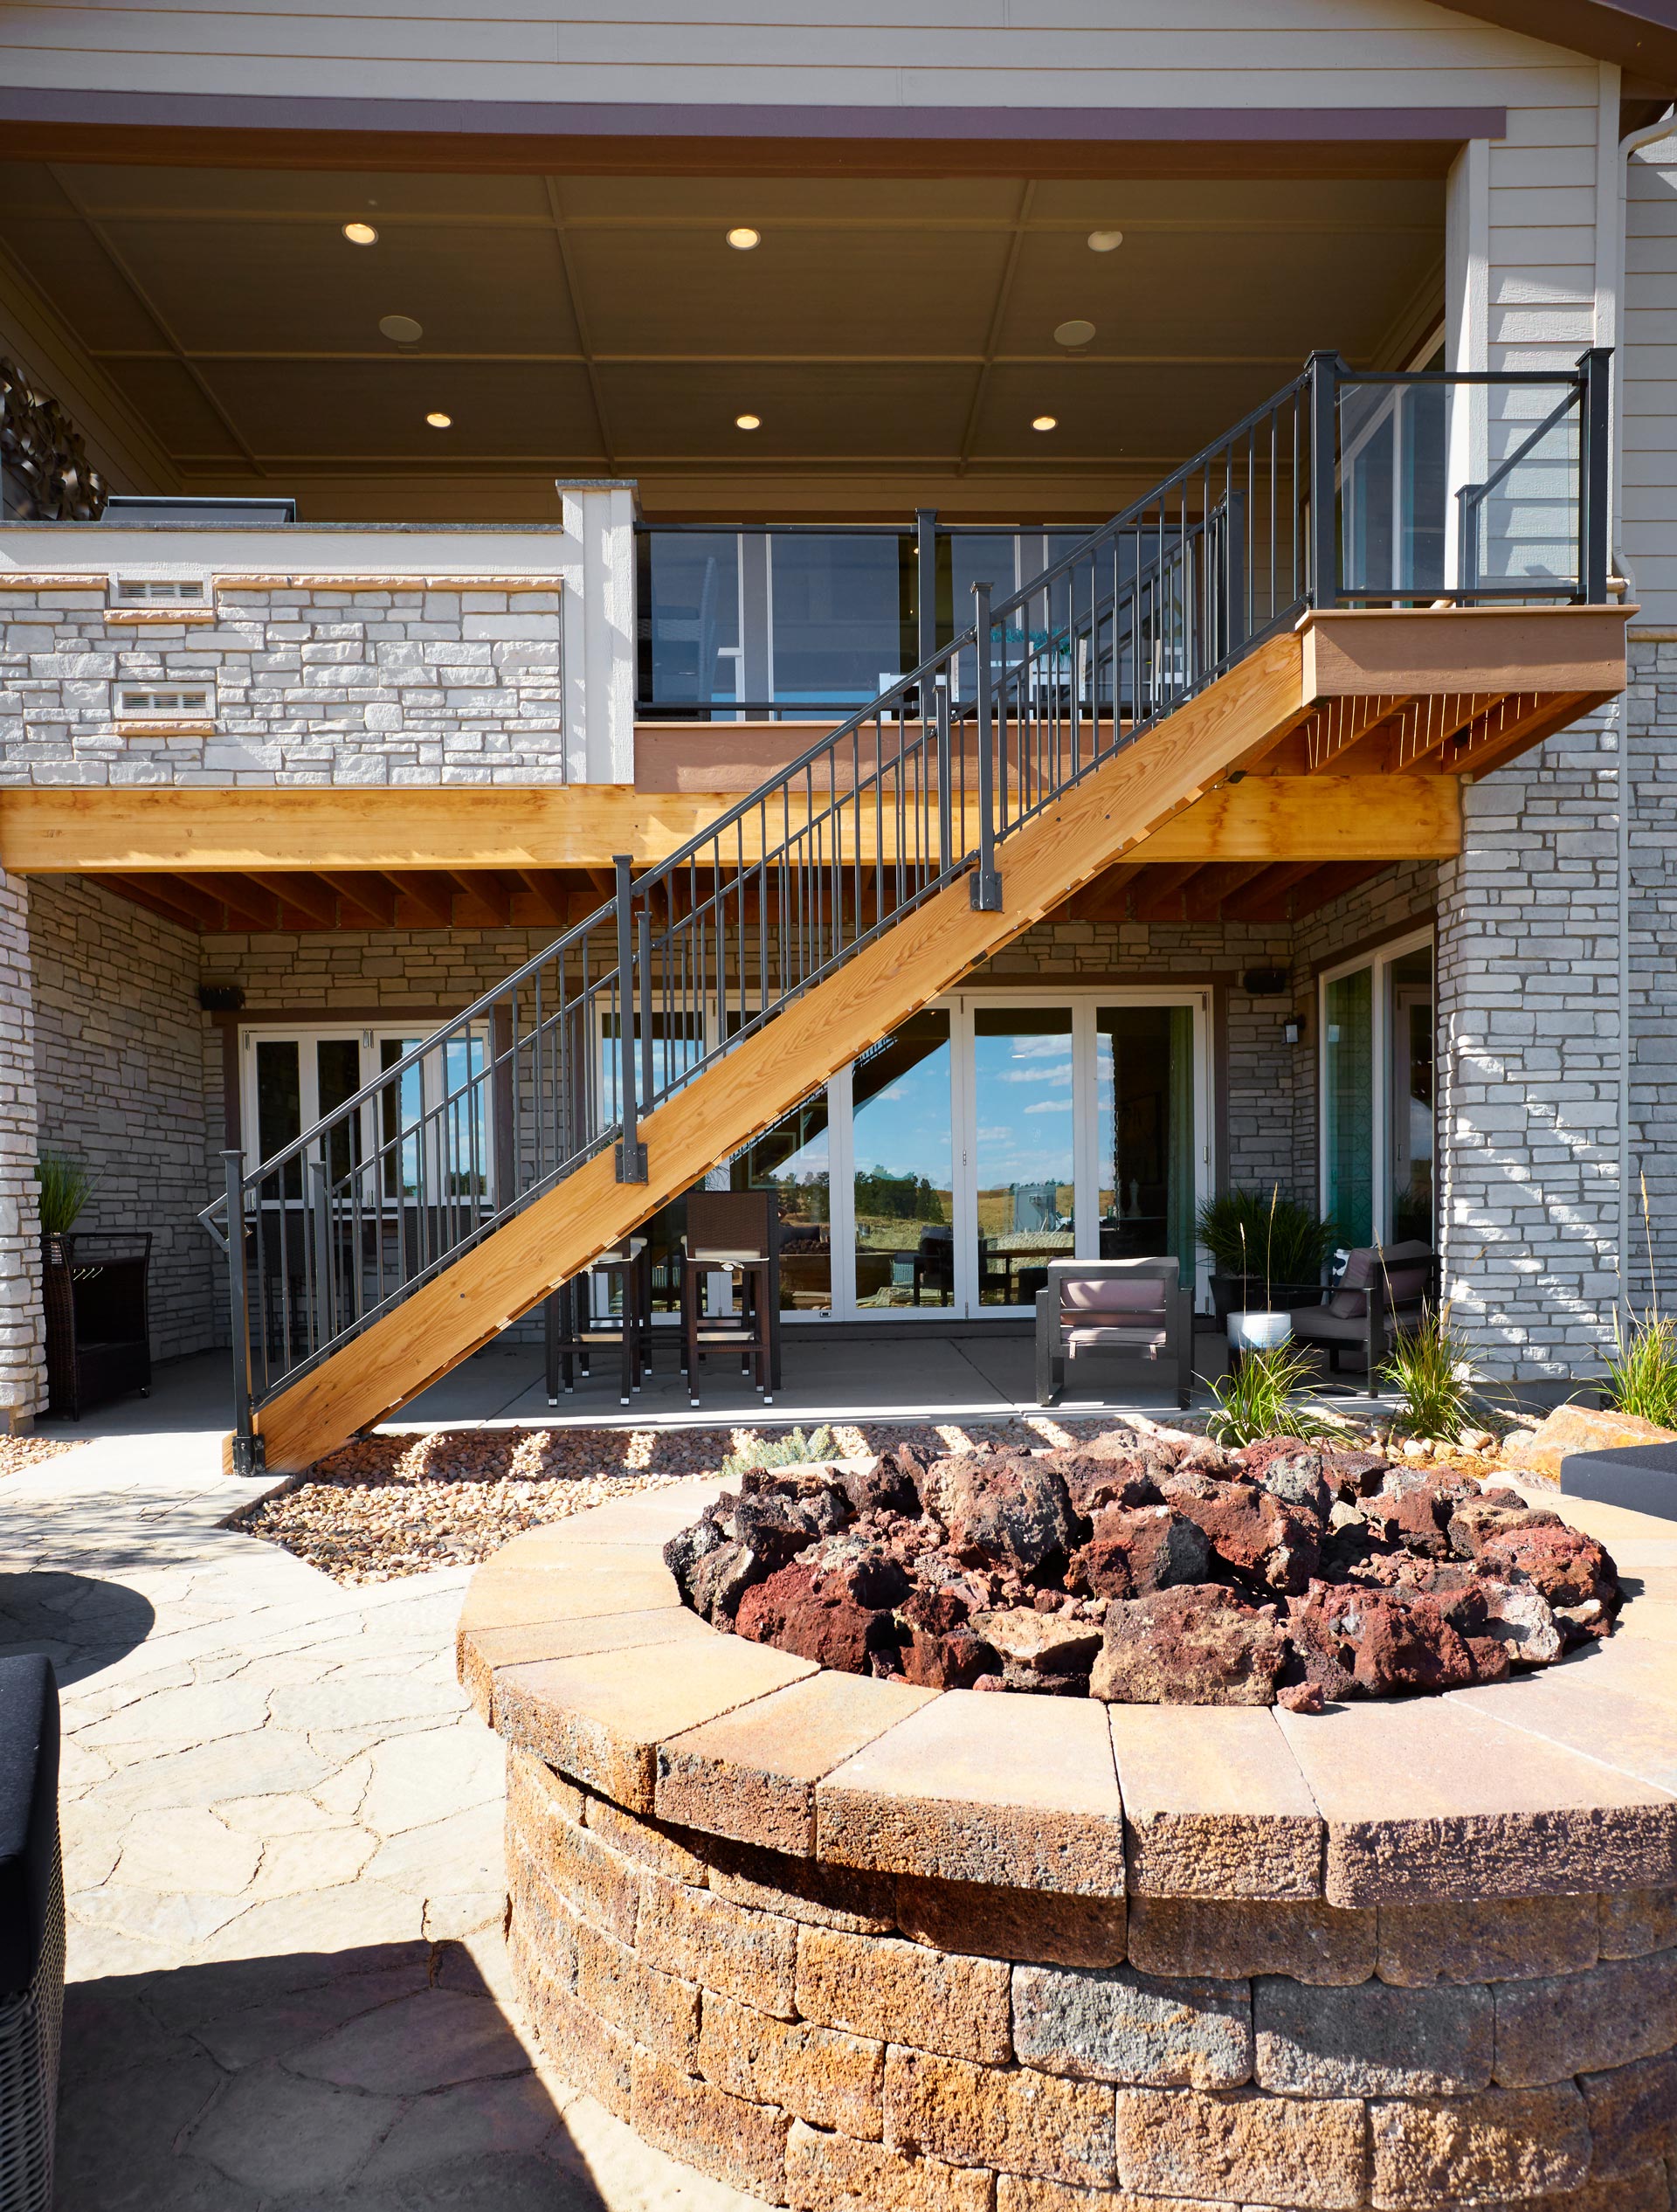 Large firepit in front of deck stairs with steel railing in from of a balcony with glass railing